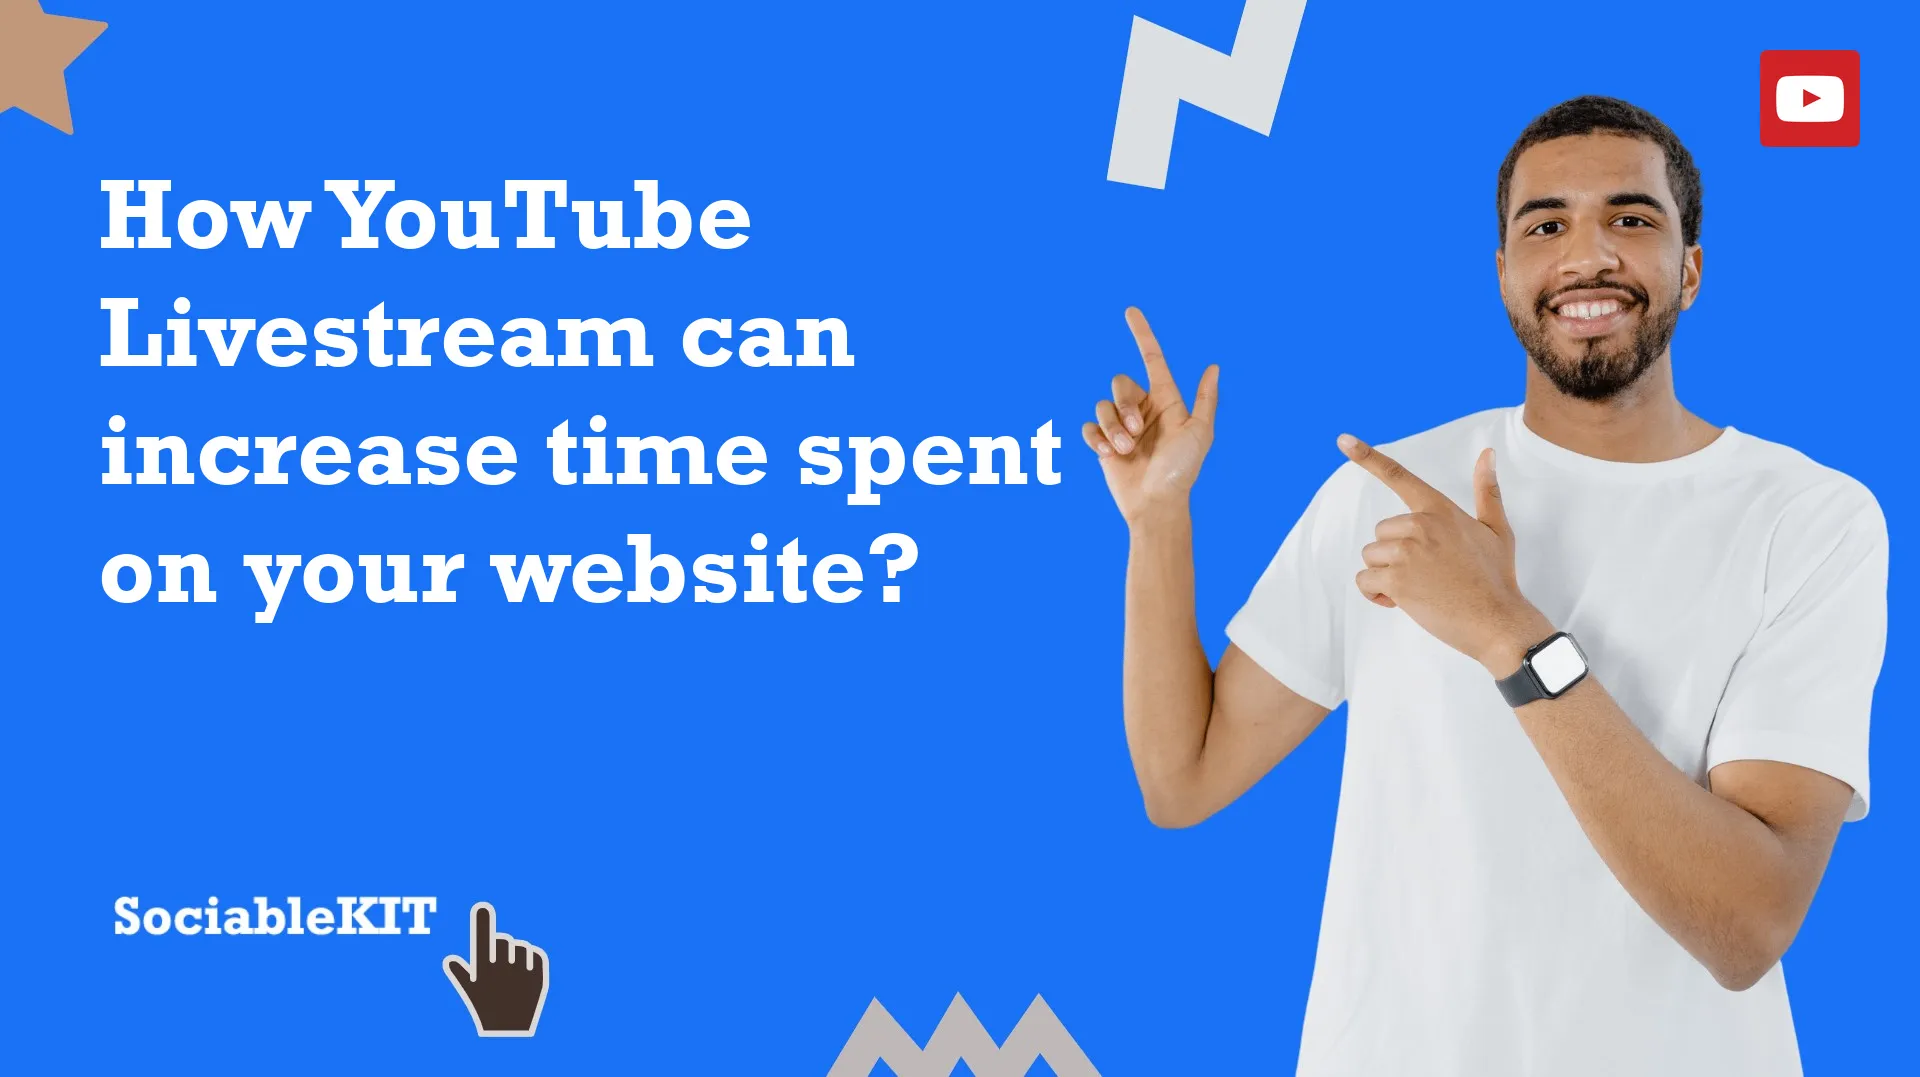 How YouTube Livestream can increase time spent on your website?